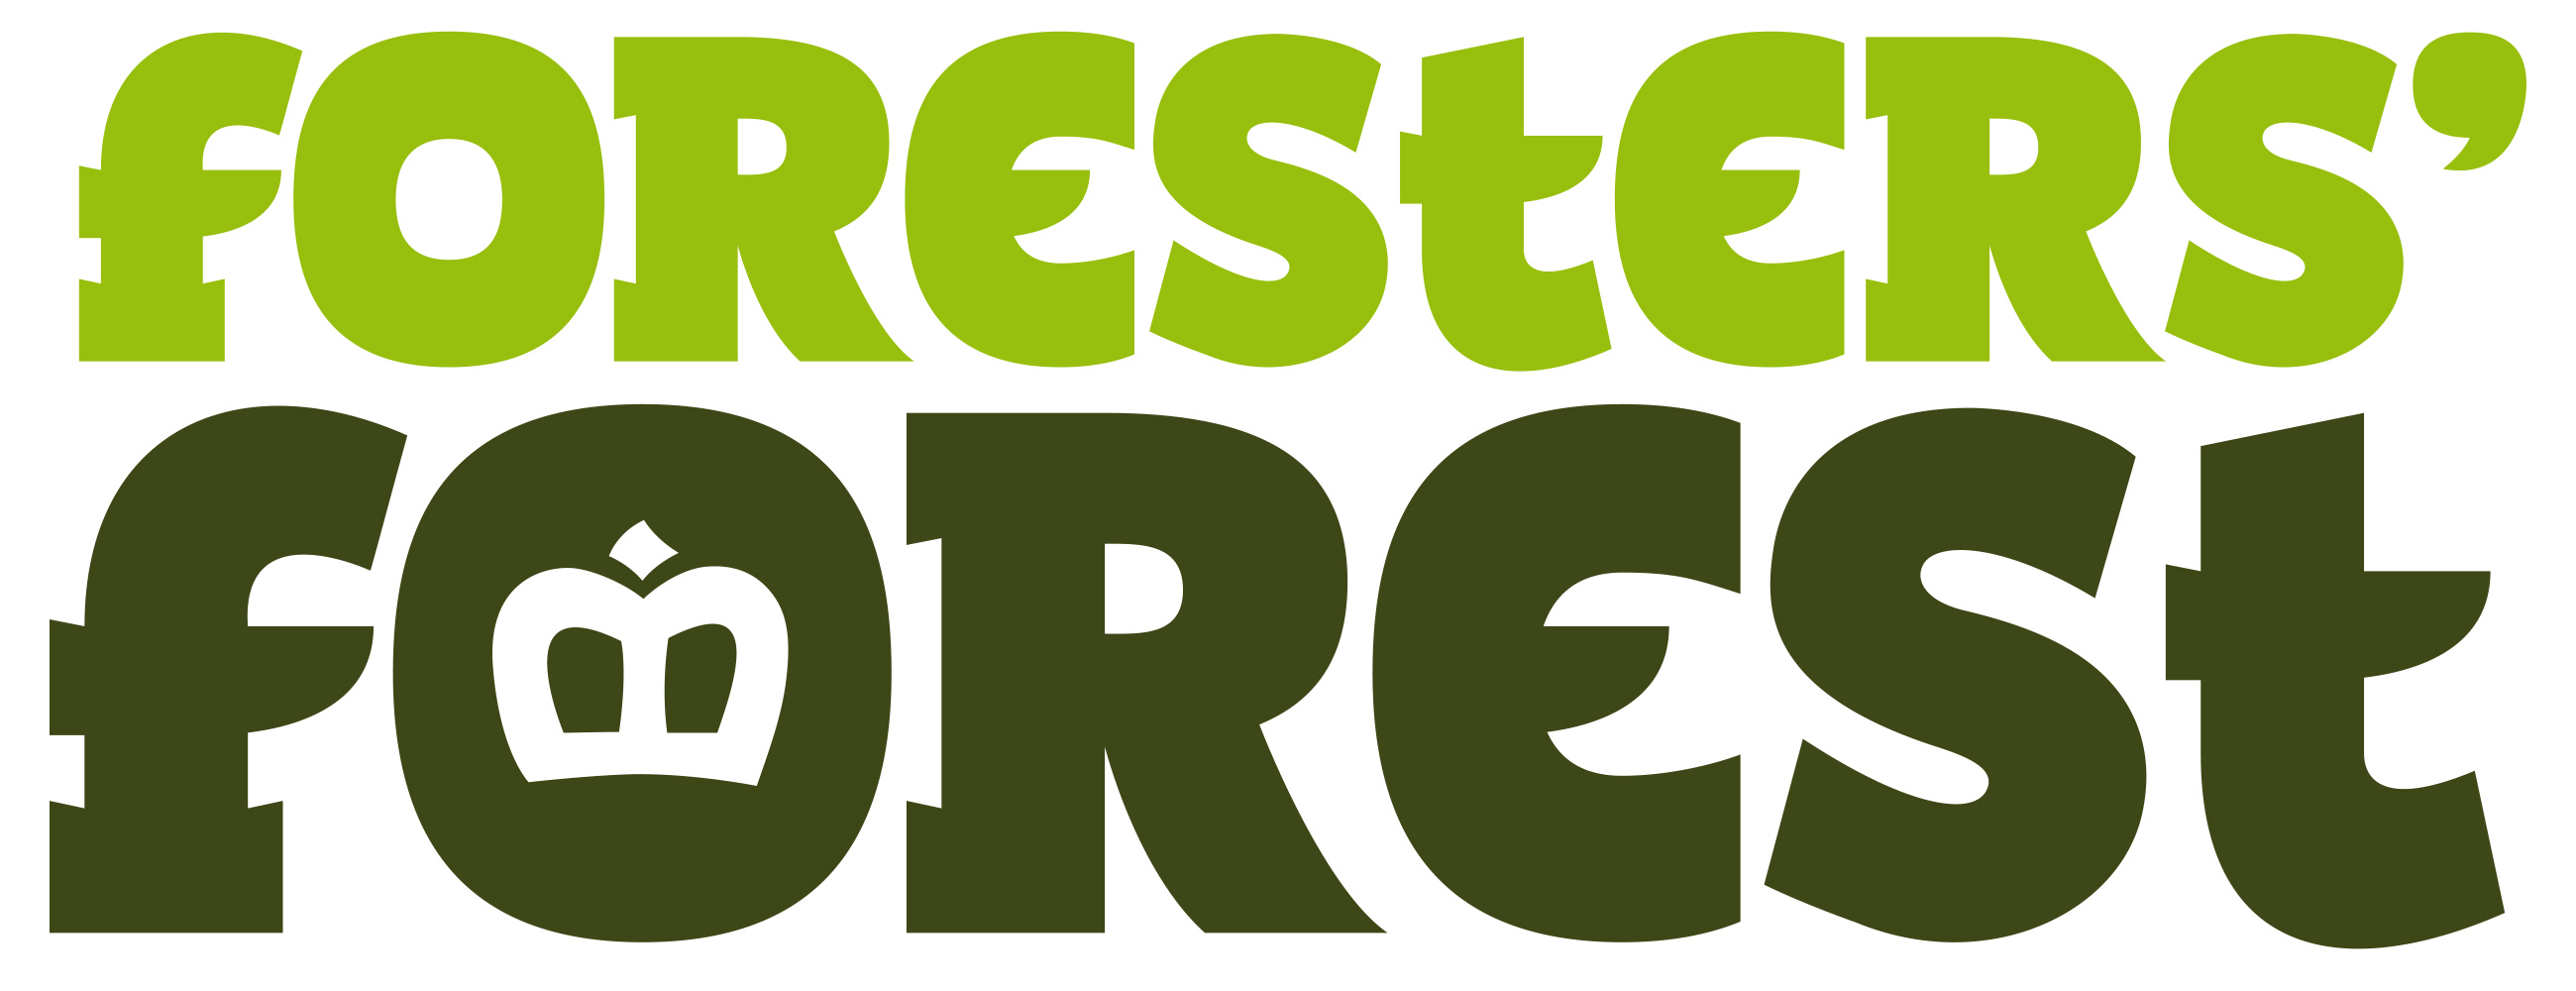 foresters forest